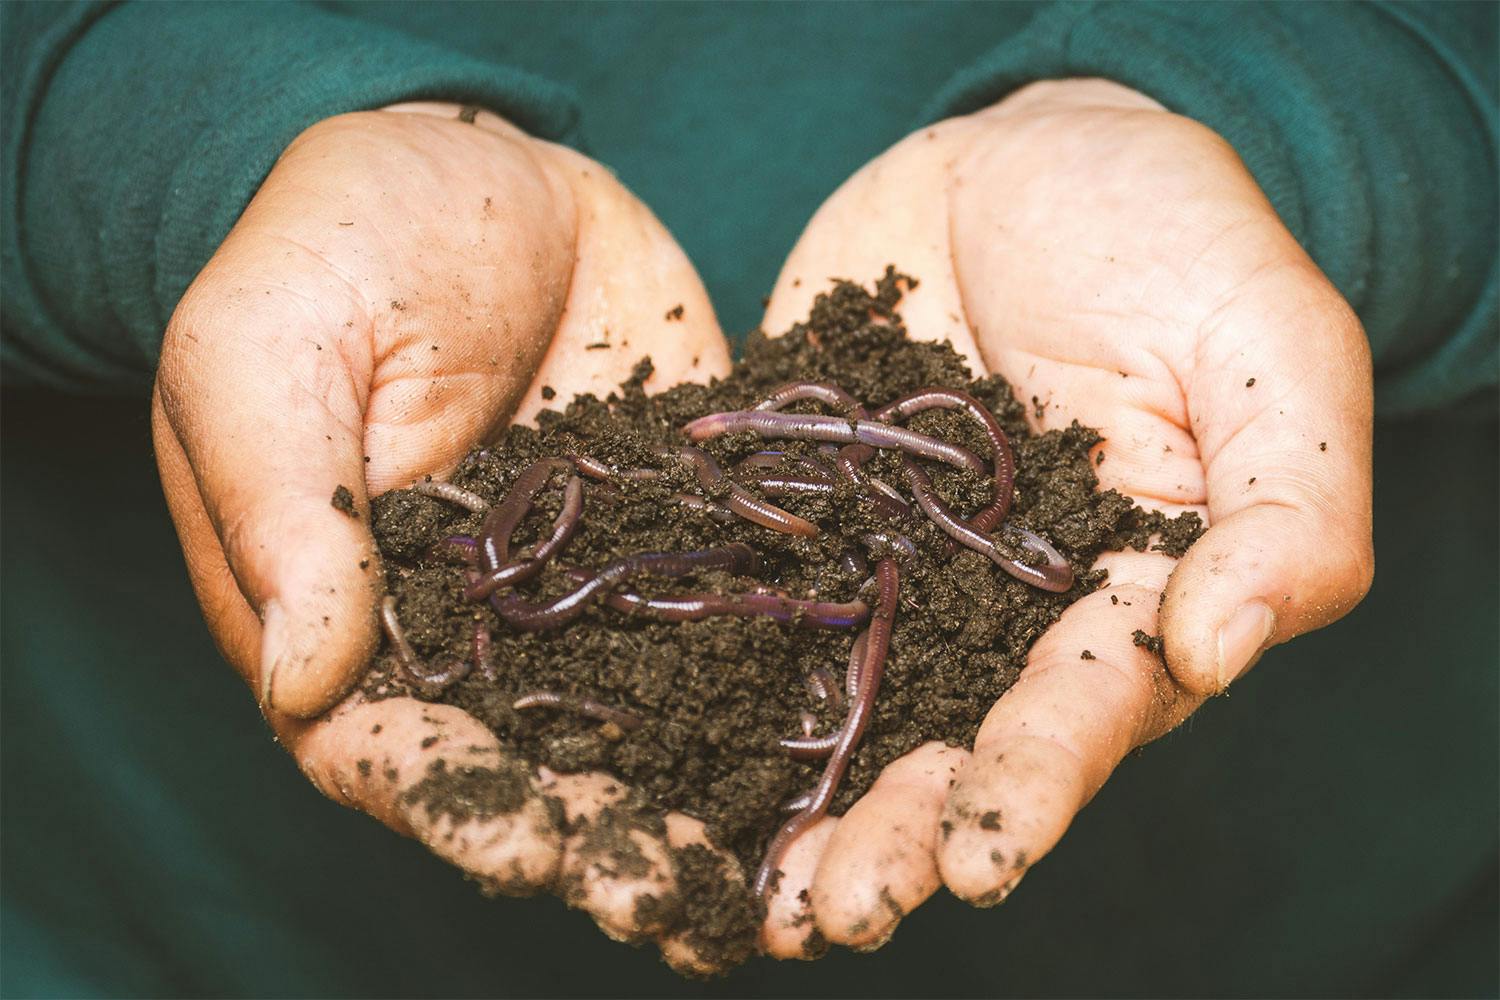 Two cupped hands holding several earthworms in a handful of dirt.